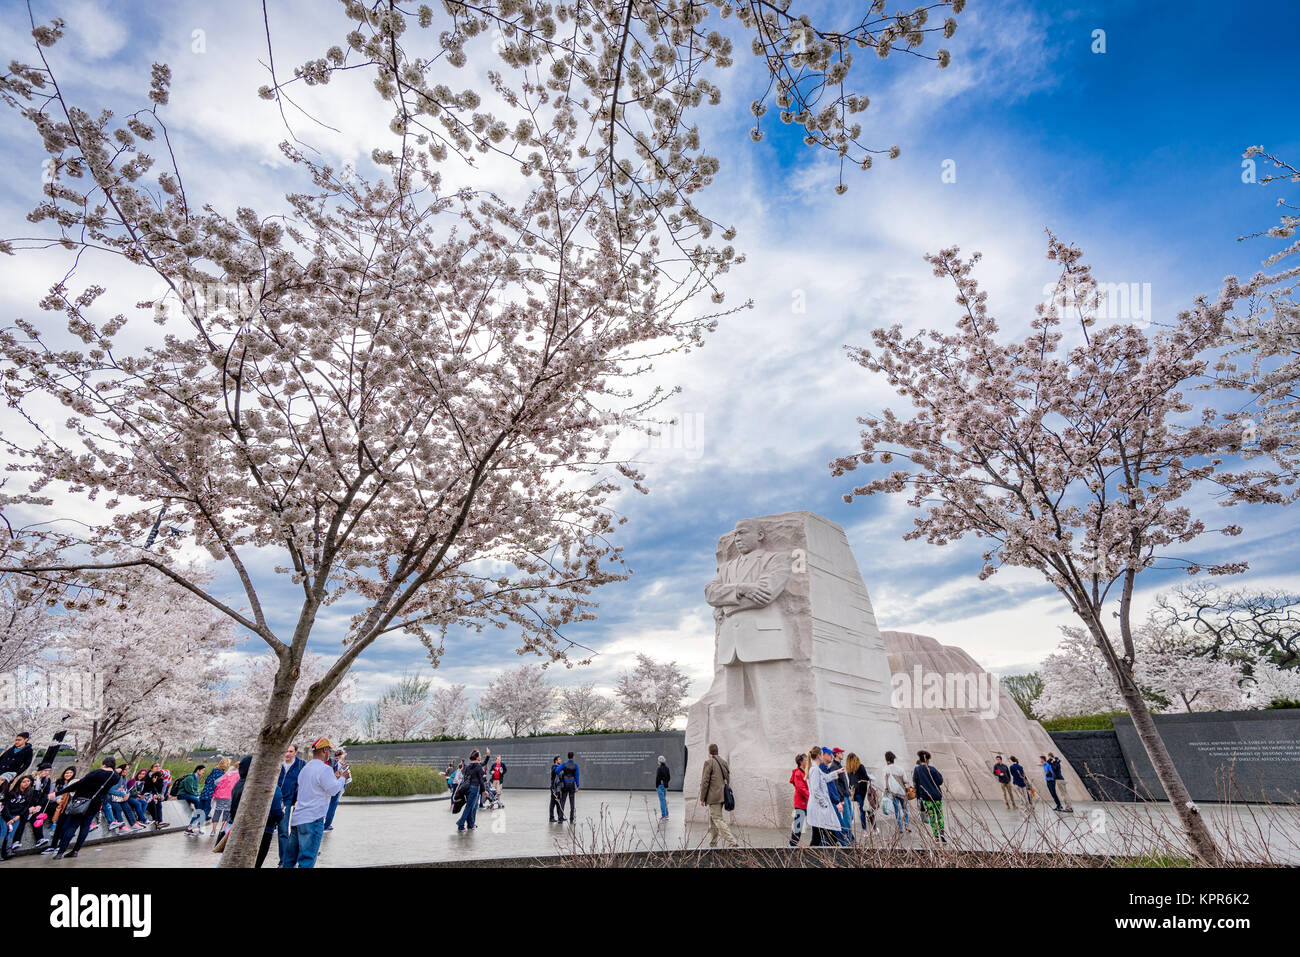 WASHINGTON - APRIL 9, 2015: The memorial to the civil rights leader Martin Luther King, Jr. during the spring season in West Potomac Park. Stock Photo